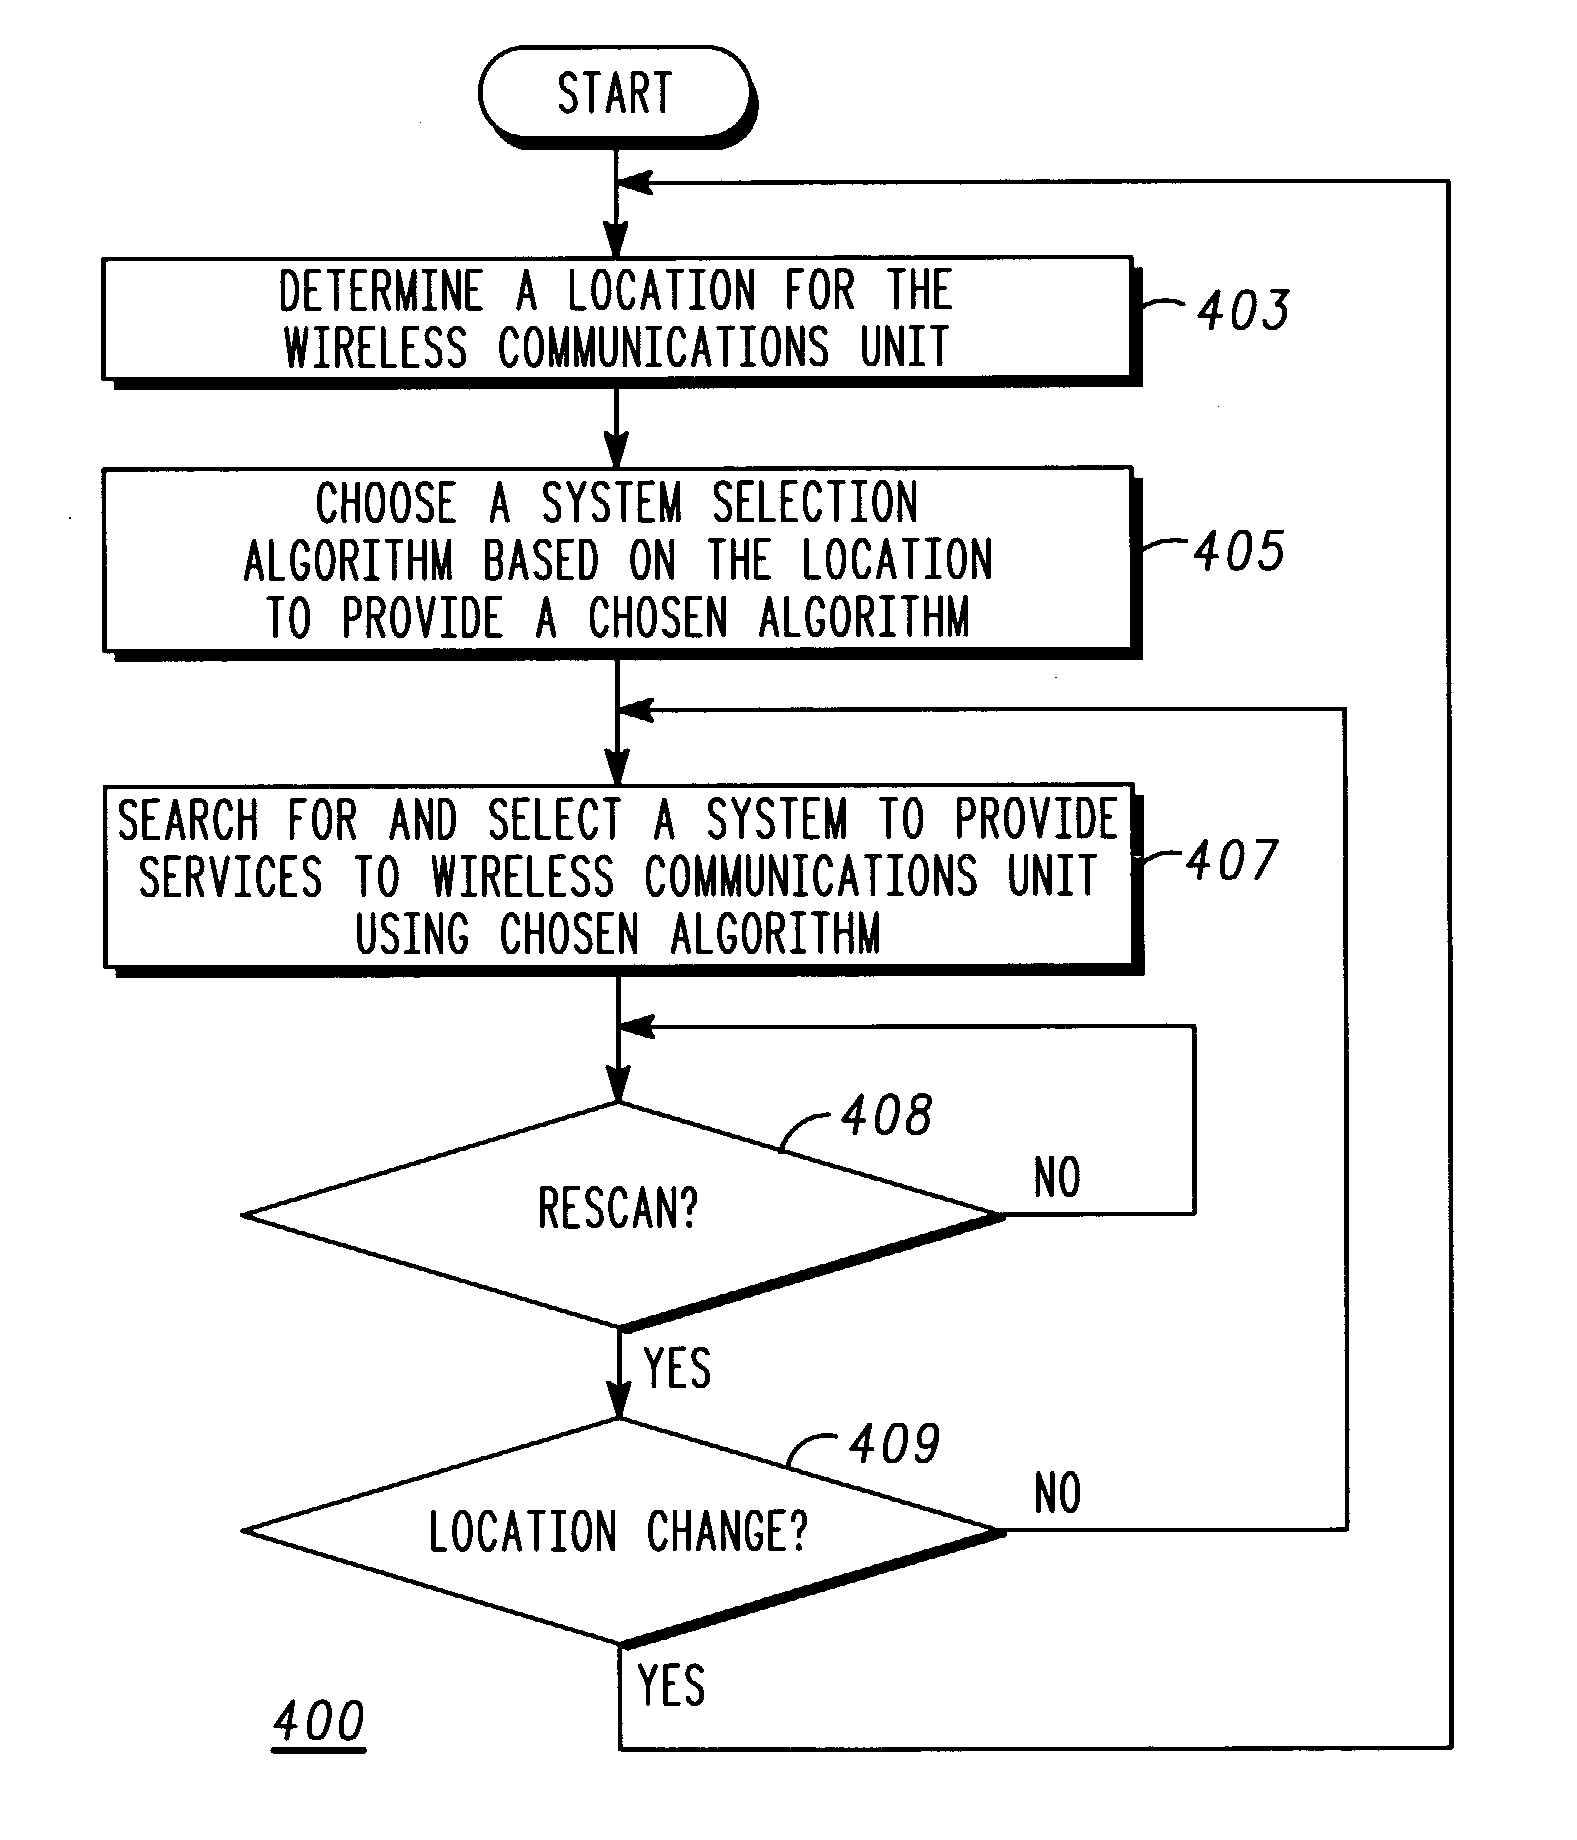 Method and device for choosing a system selection algorithm that is location dependent